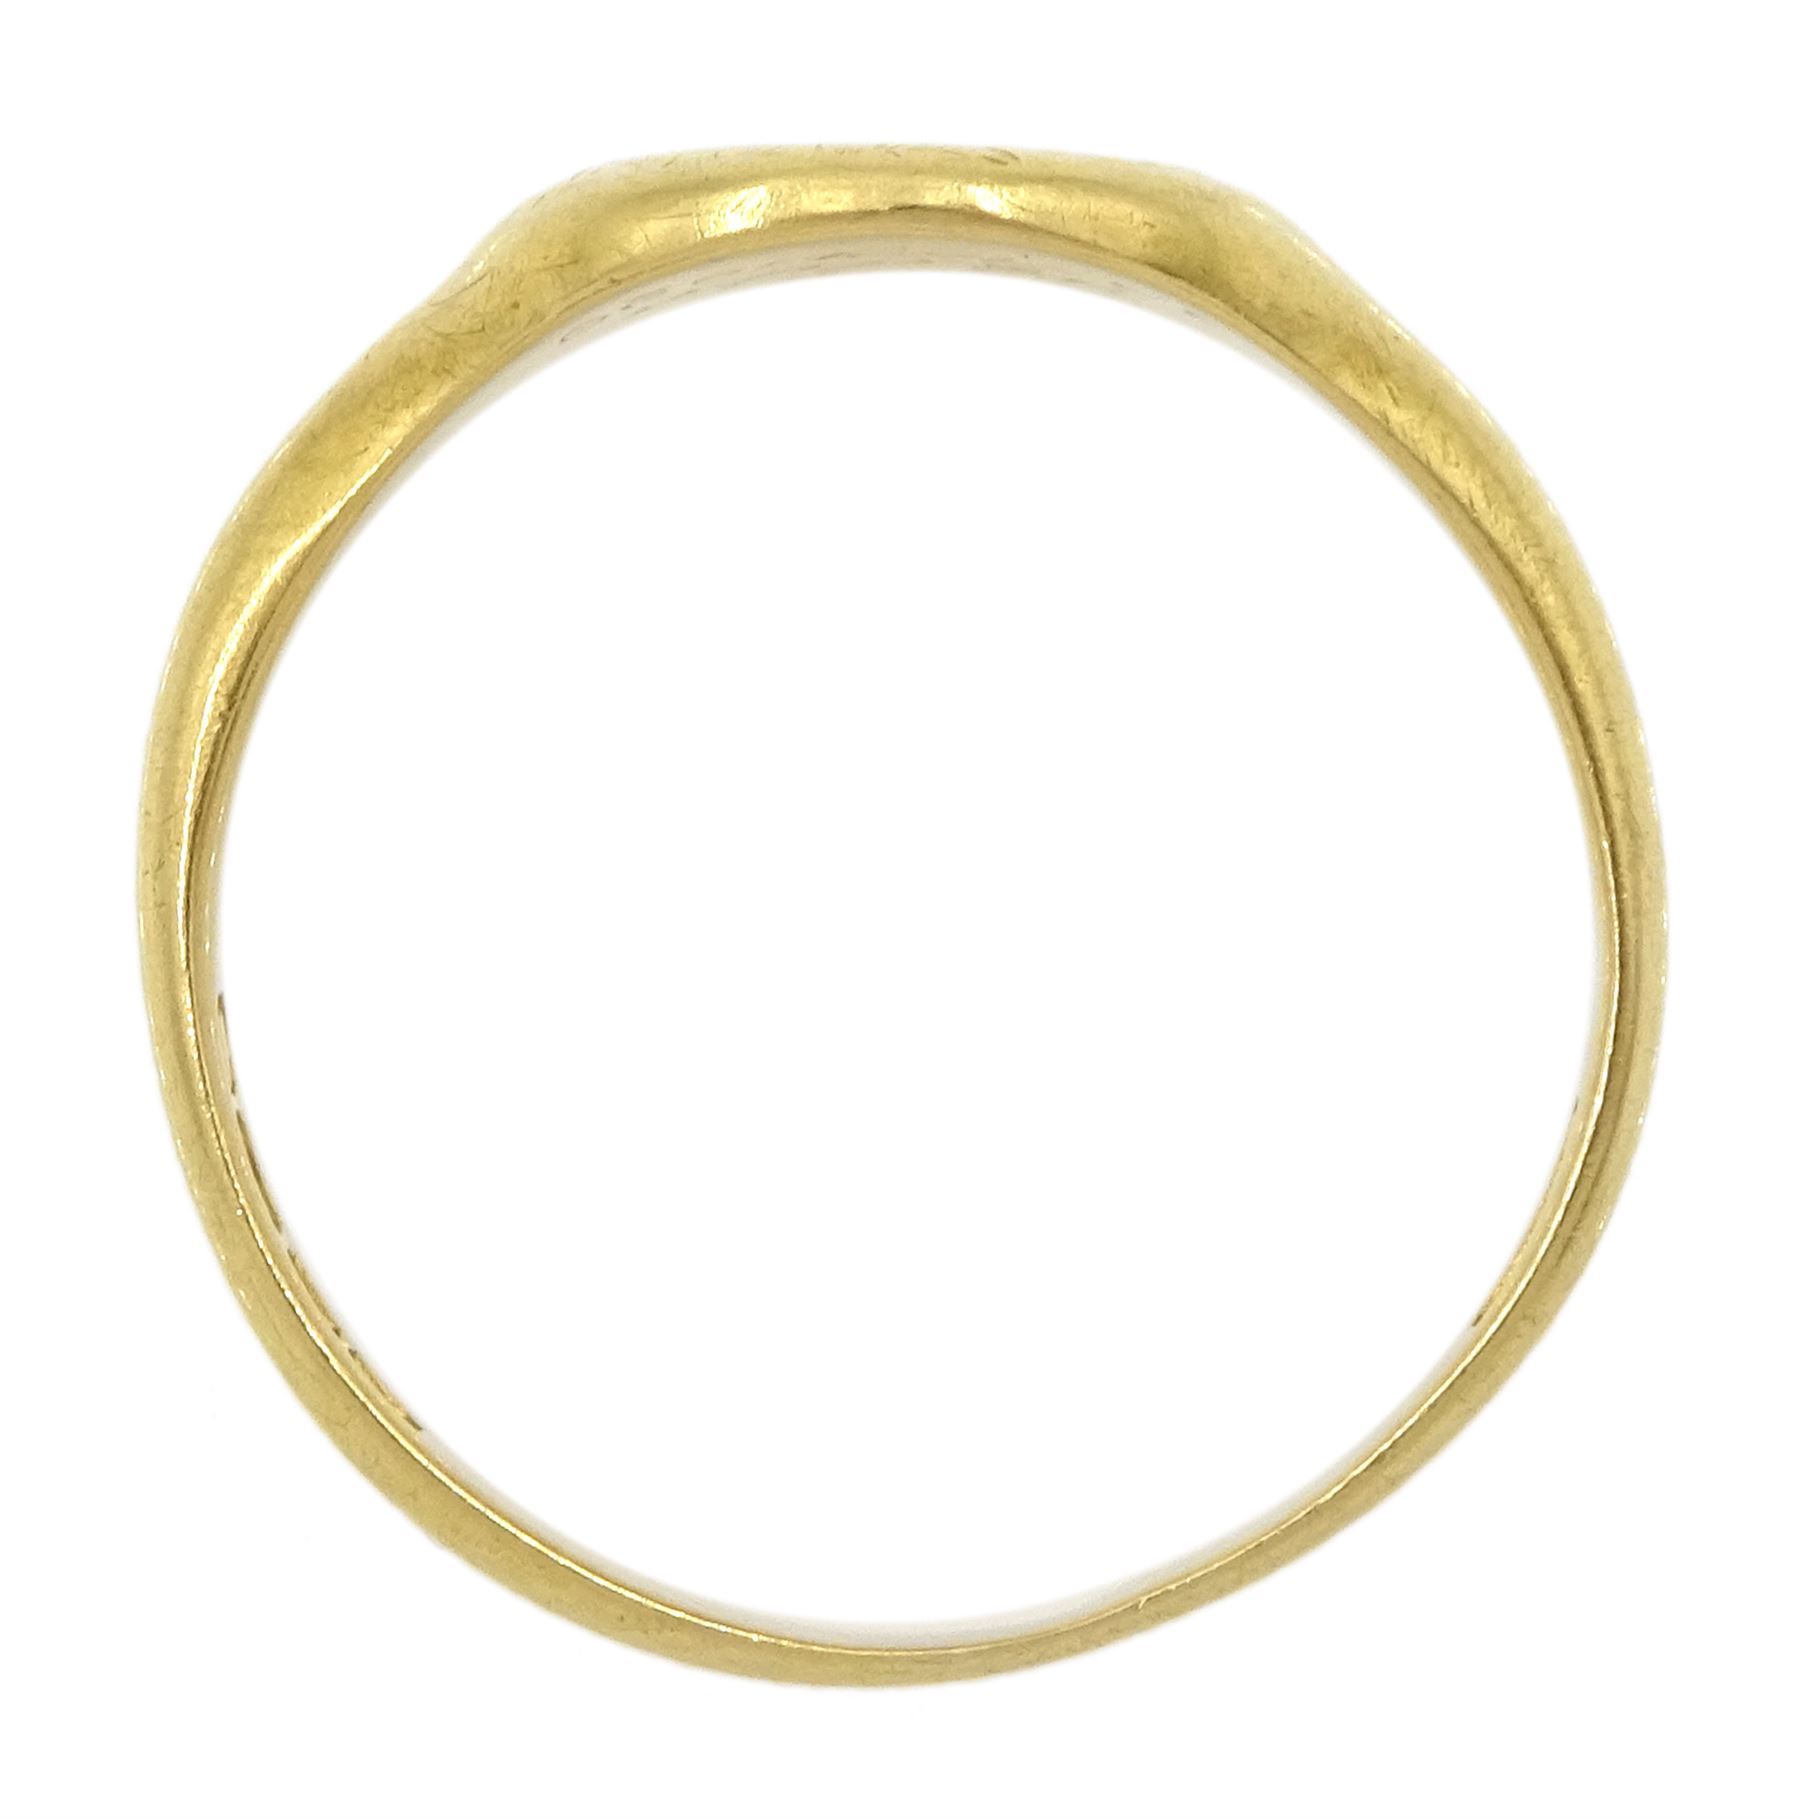 Early 20th century 18ct gold signet ring - Image 4 of 4